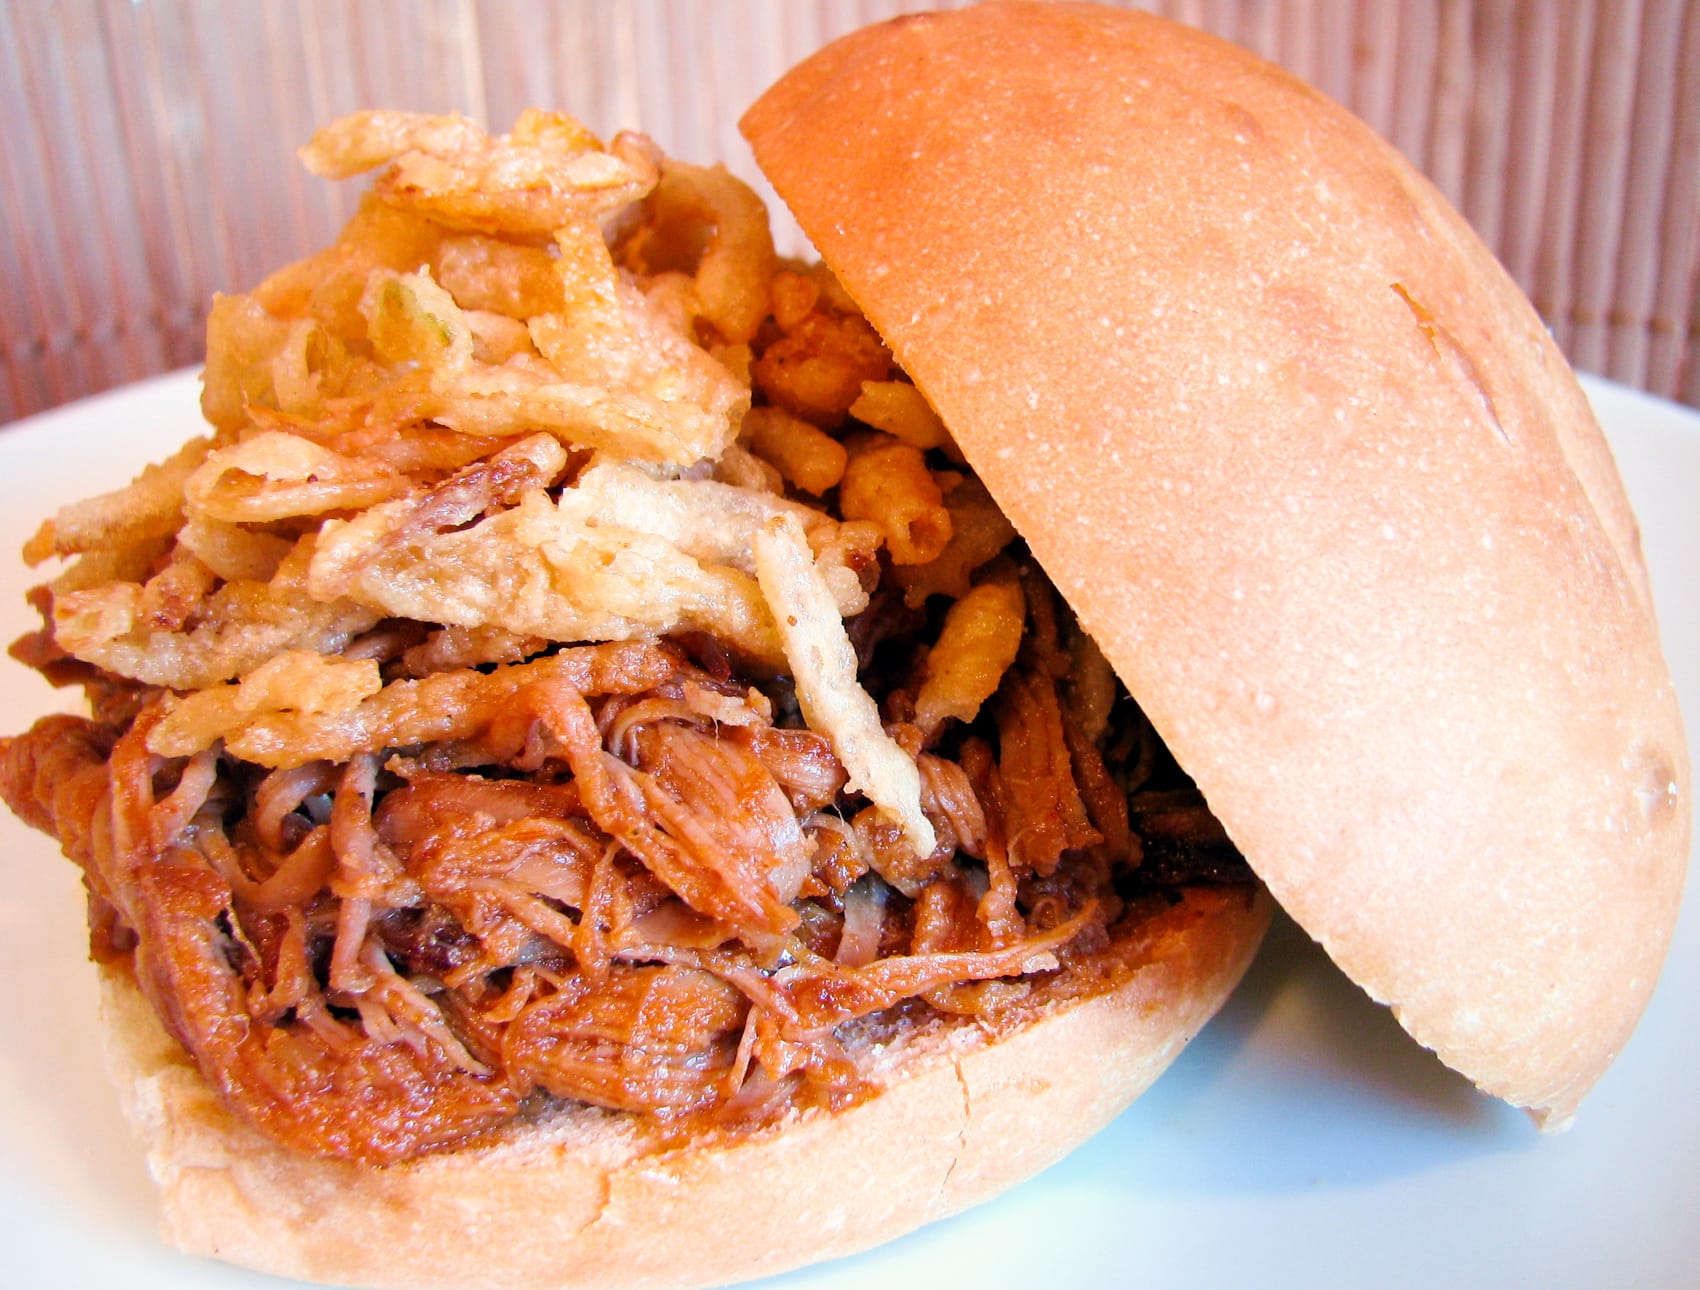 Barbecued Pulled Pork Sandwiches